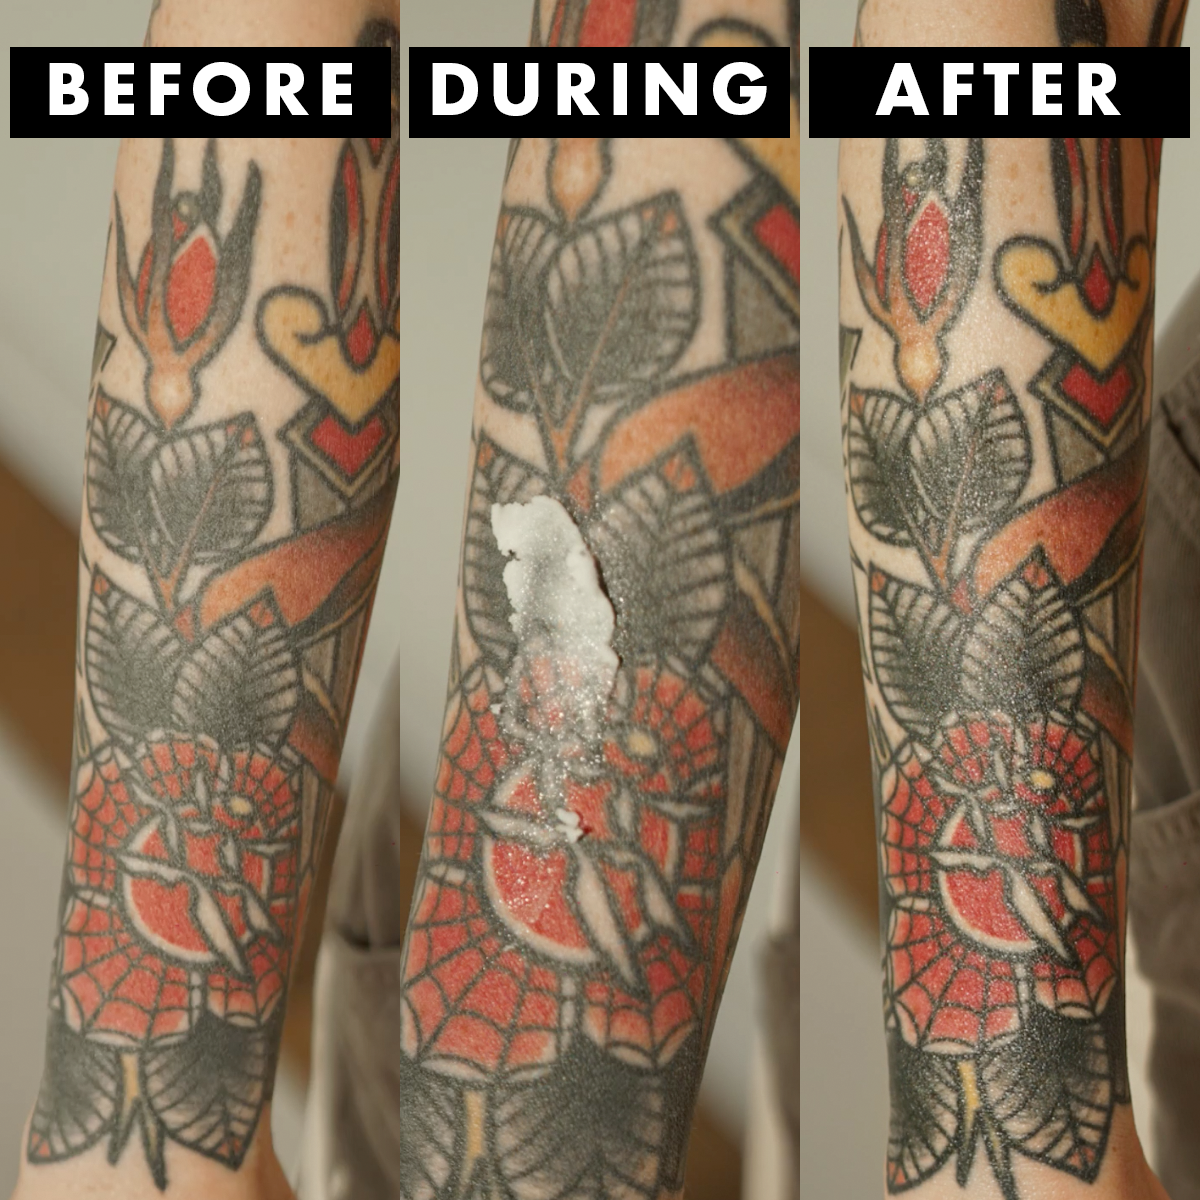 5 Ways to Make Your Tattoos More Vibrant